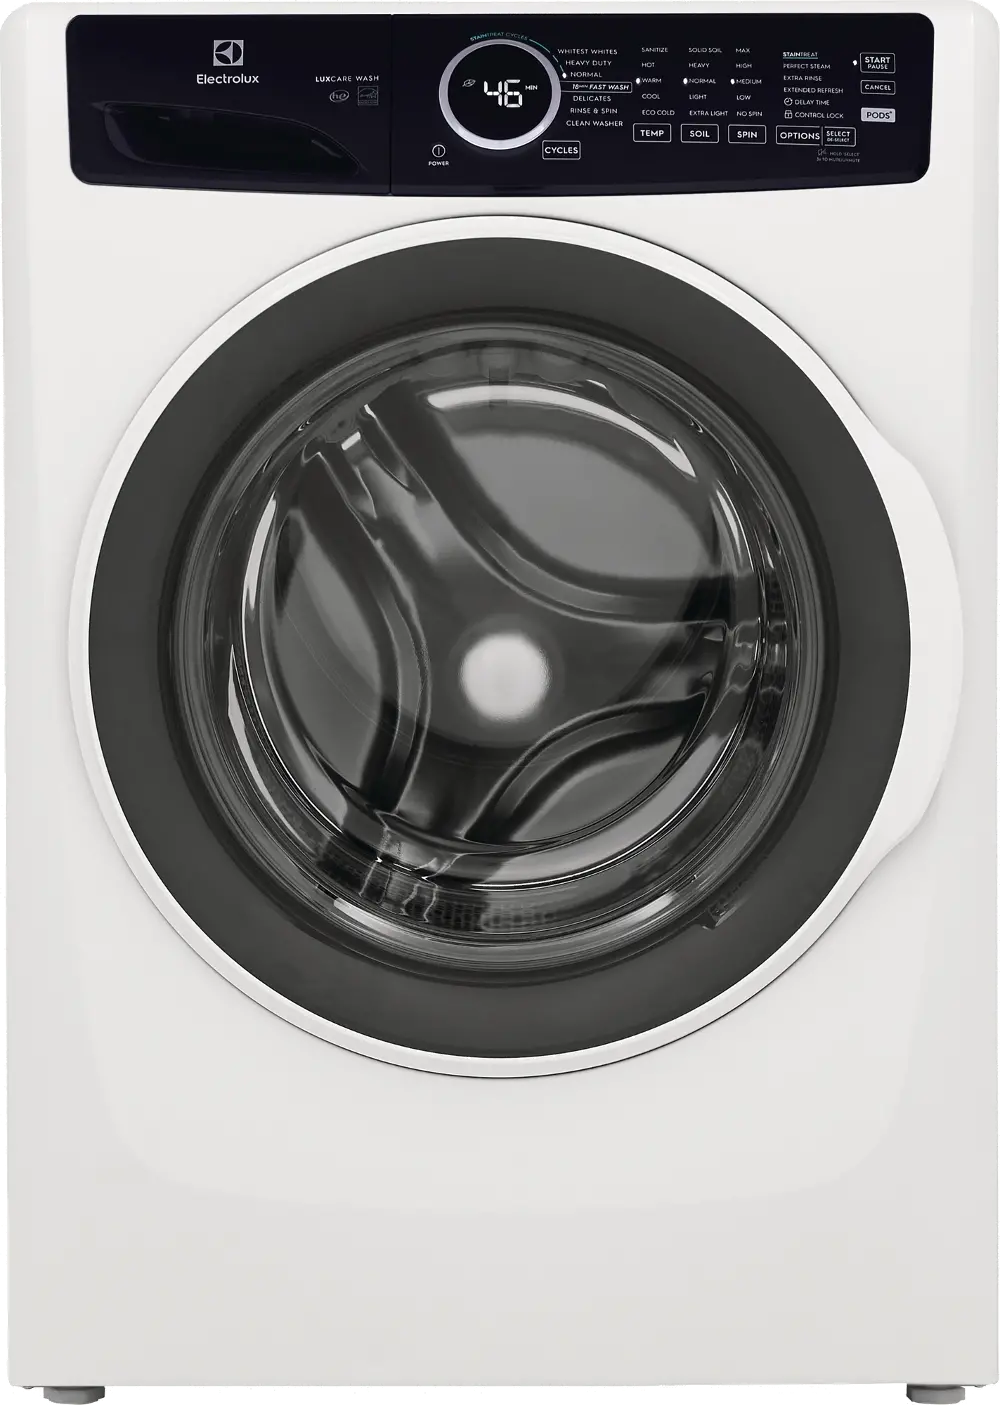 ELFW7437AW Electrolux 4.5 cu ft Front Load Washer - White ELF7437A-1